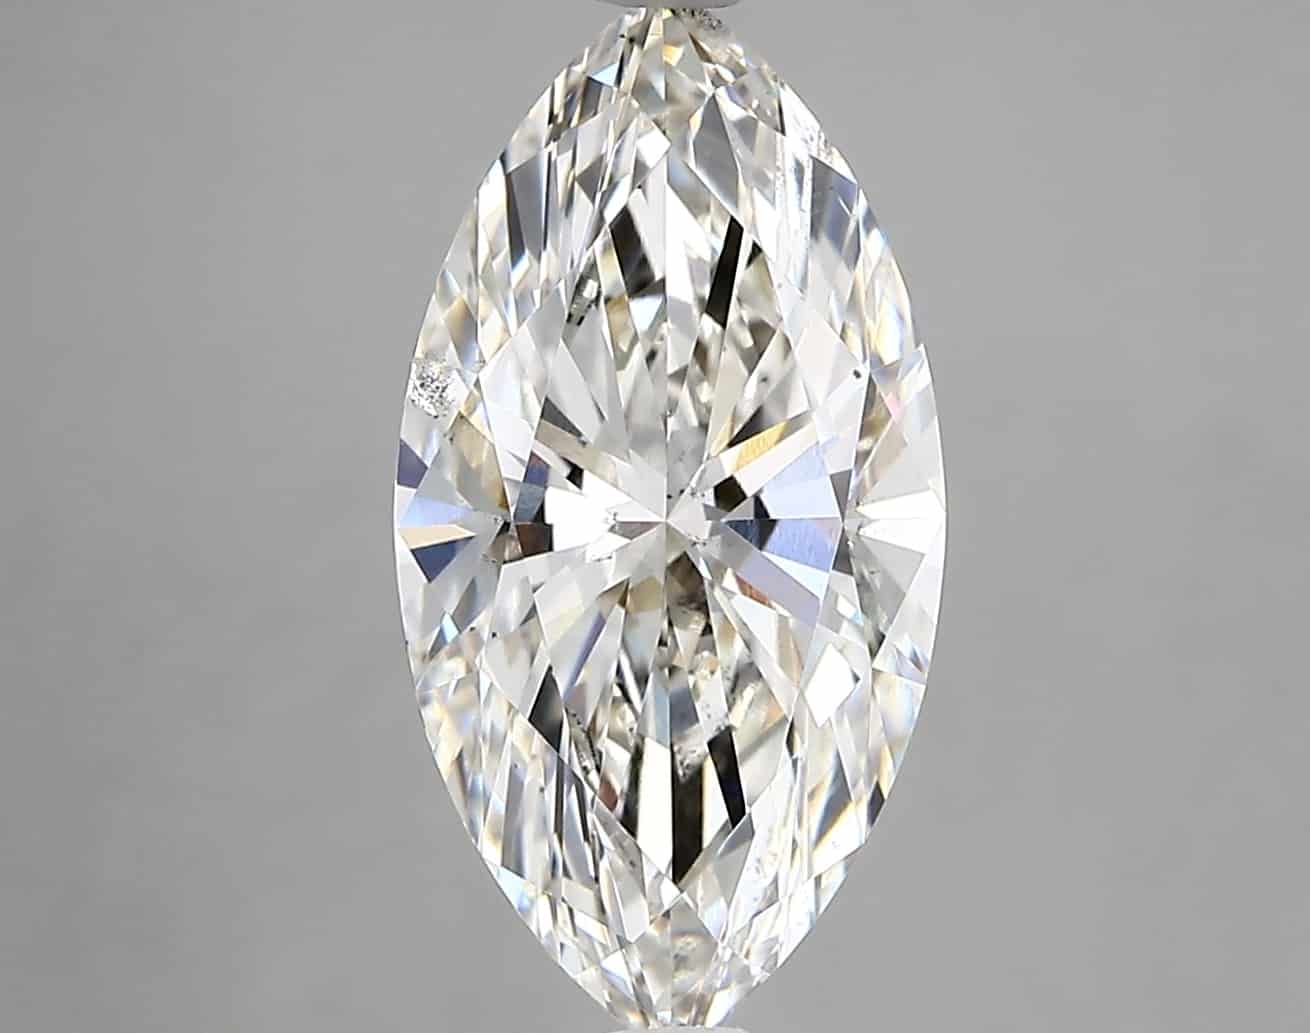 Lab Grown 3.35 Carat Diamond IGI Certified si1 clarity and H color